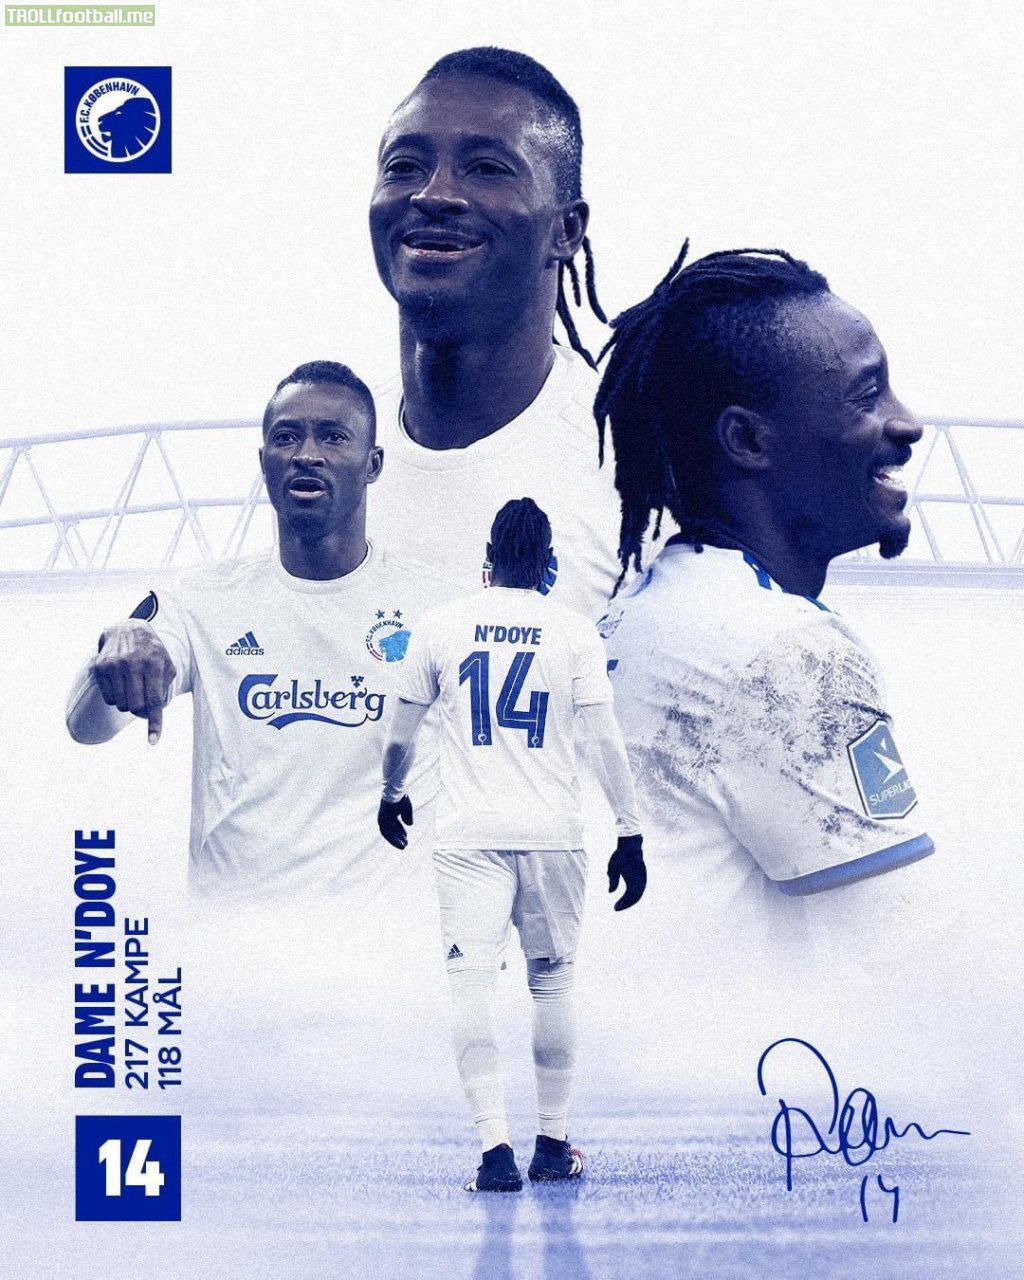 Maybe this is not world news, but I wanna inform you that the biggest legend in FC Copenhagen Dame N’Doye, has played his last game for the club.